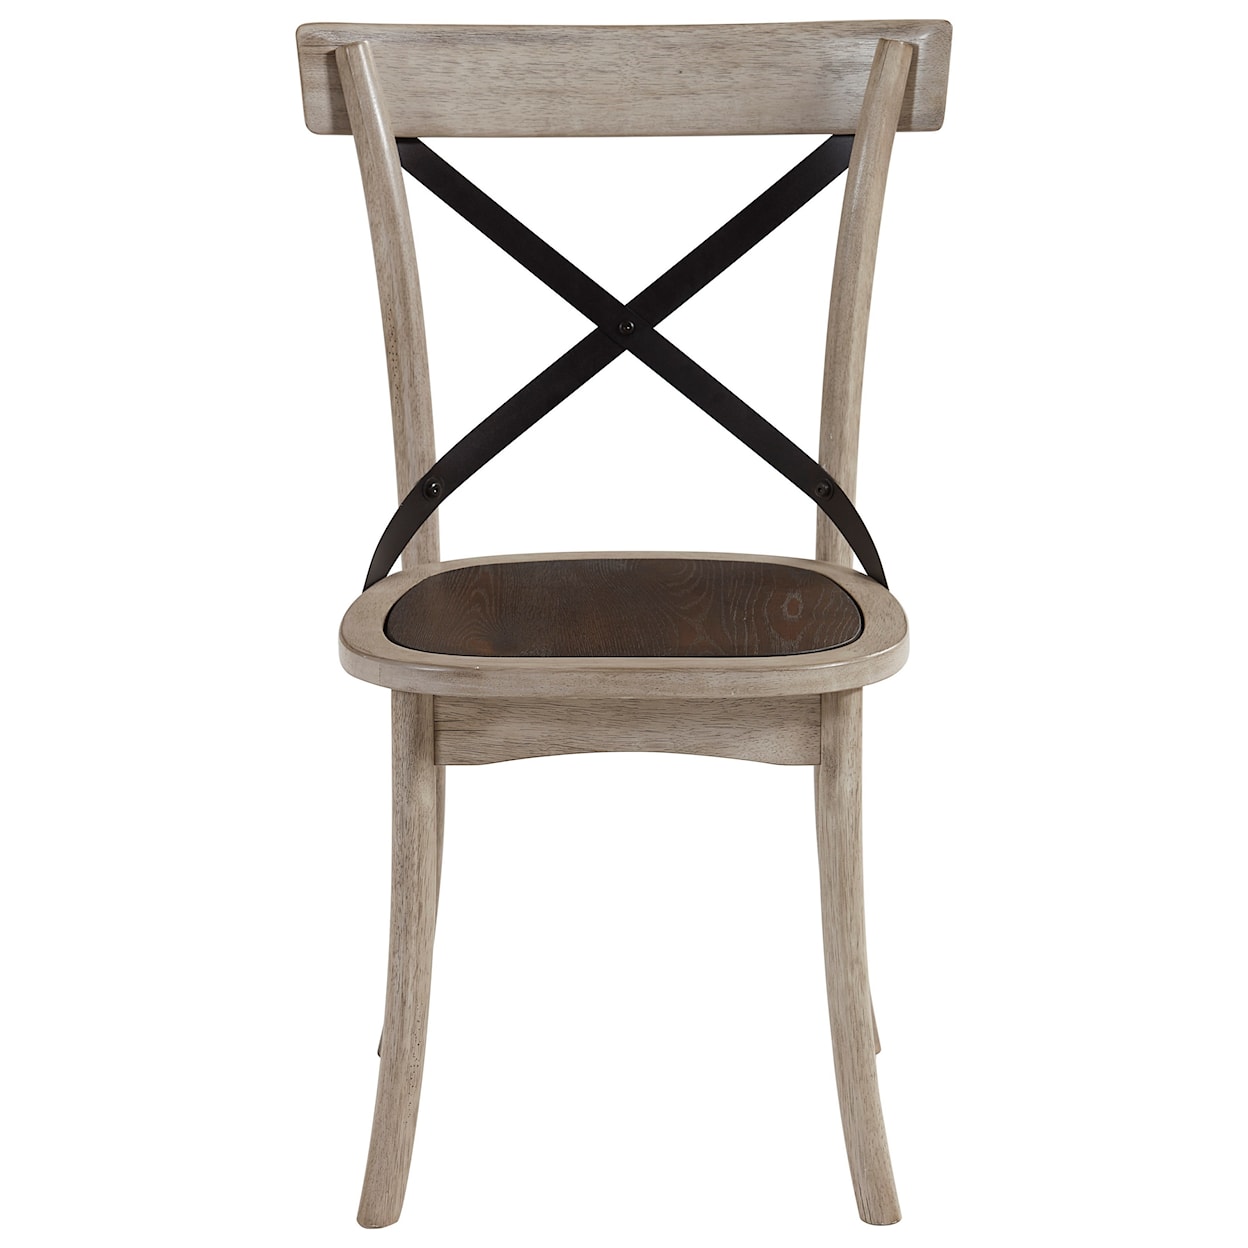 Carolina Chairs Winslet X-Back Dining Chair 